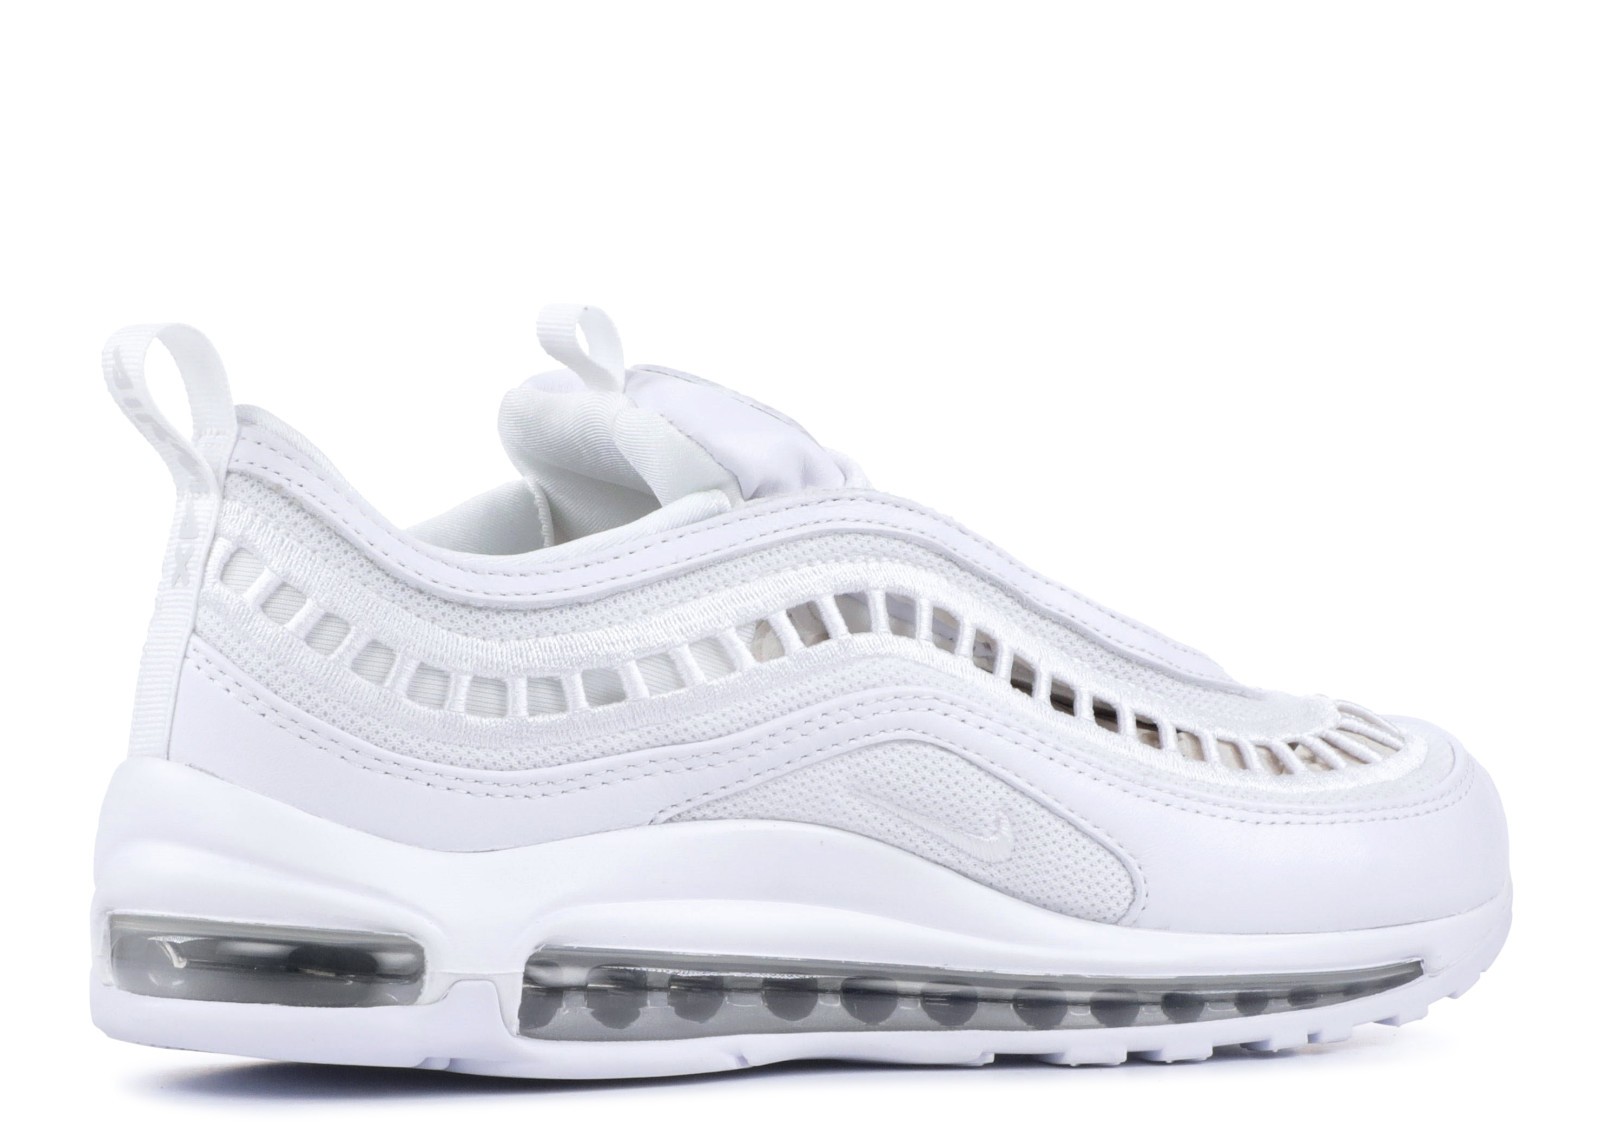 brandy apilar reducir 100 - MultiscaleconsultingShops - W Air Max shado 97 Ul 17 Si White Grey  Vast AO2326 - black and lime green nike boots clearance store